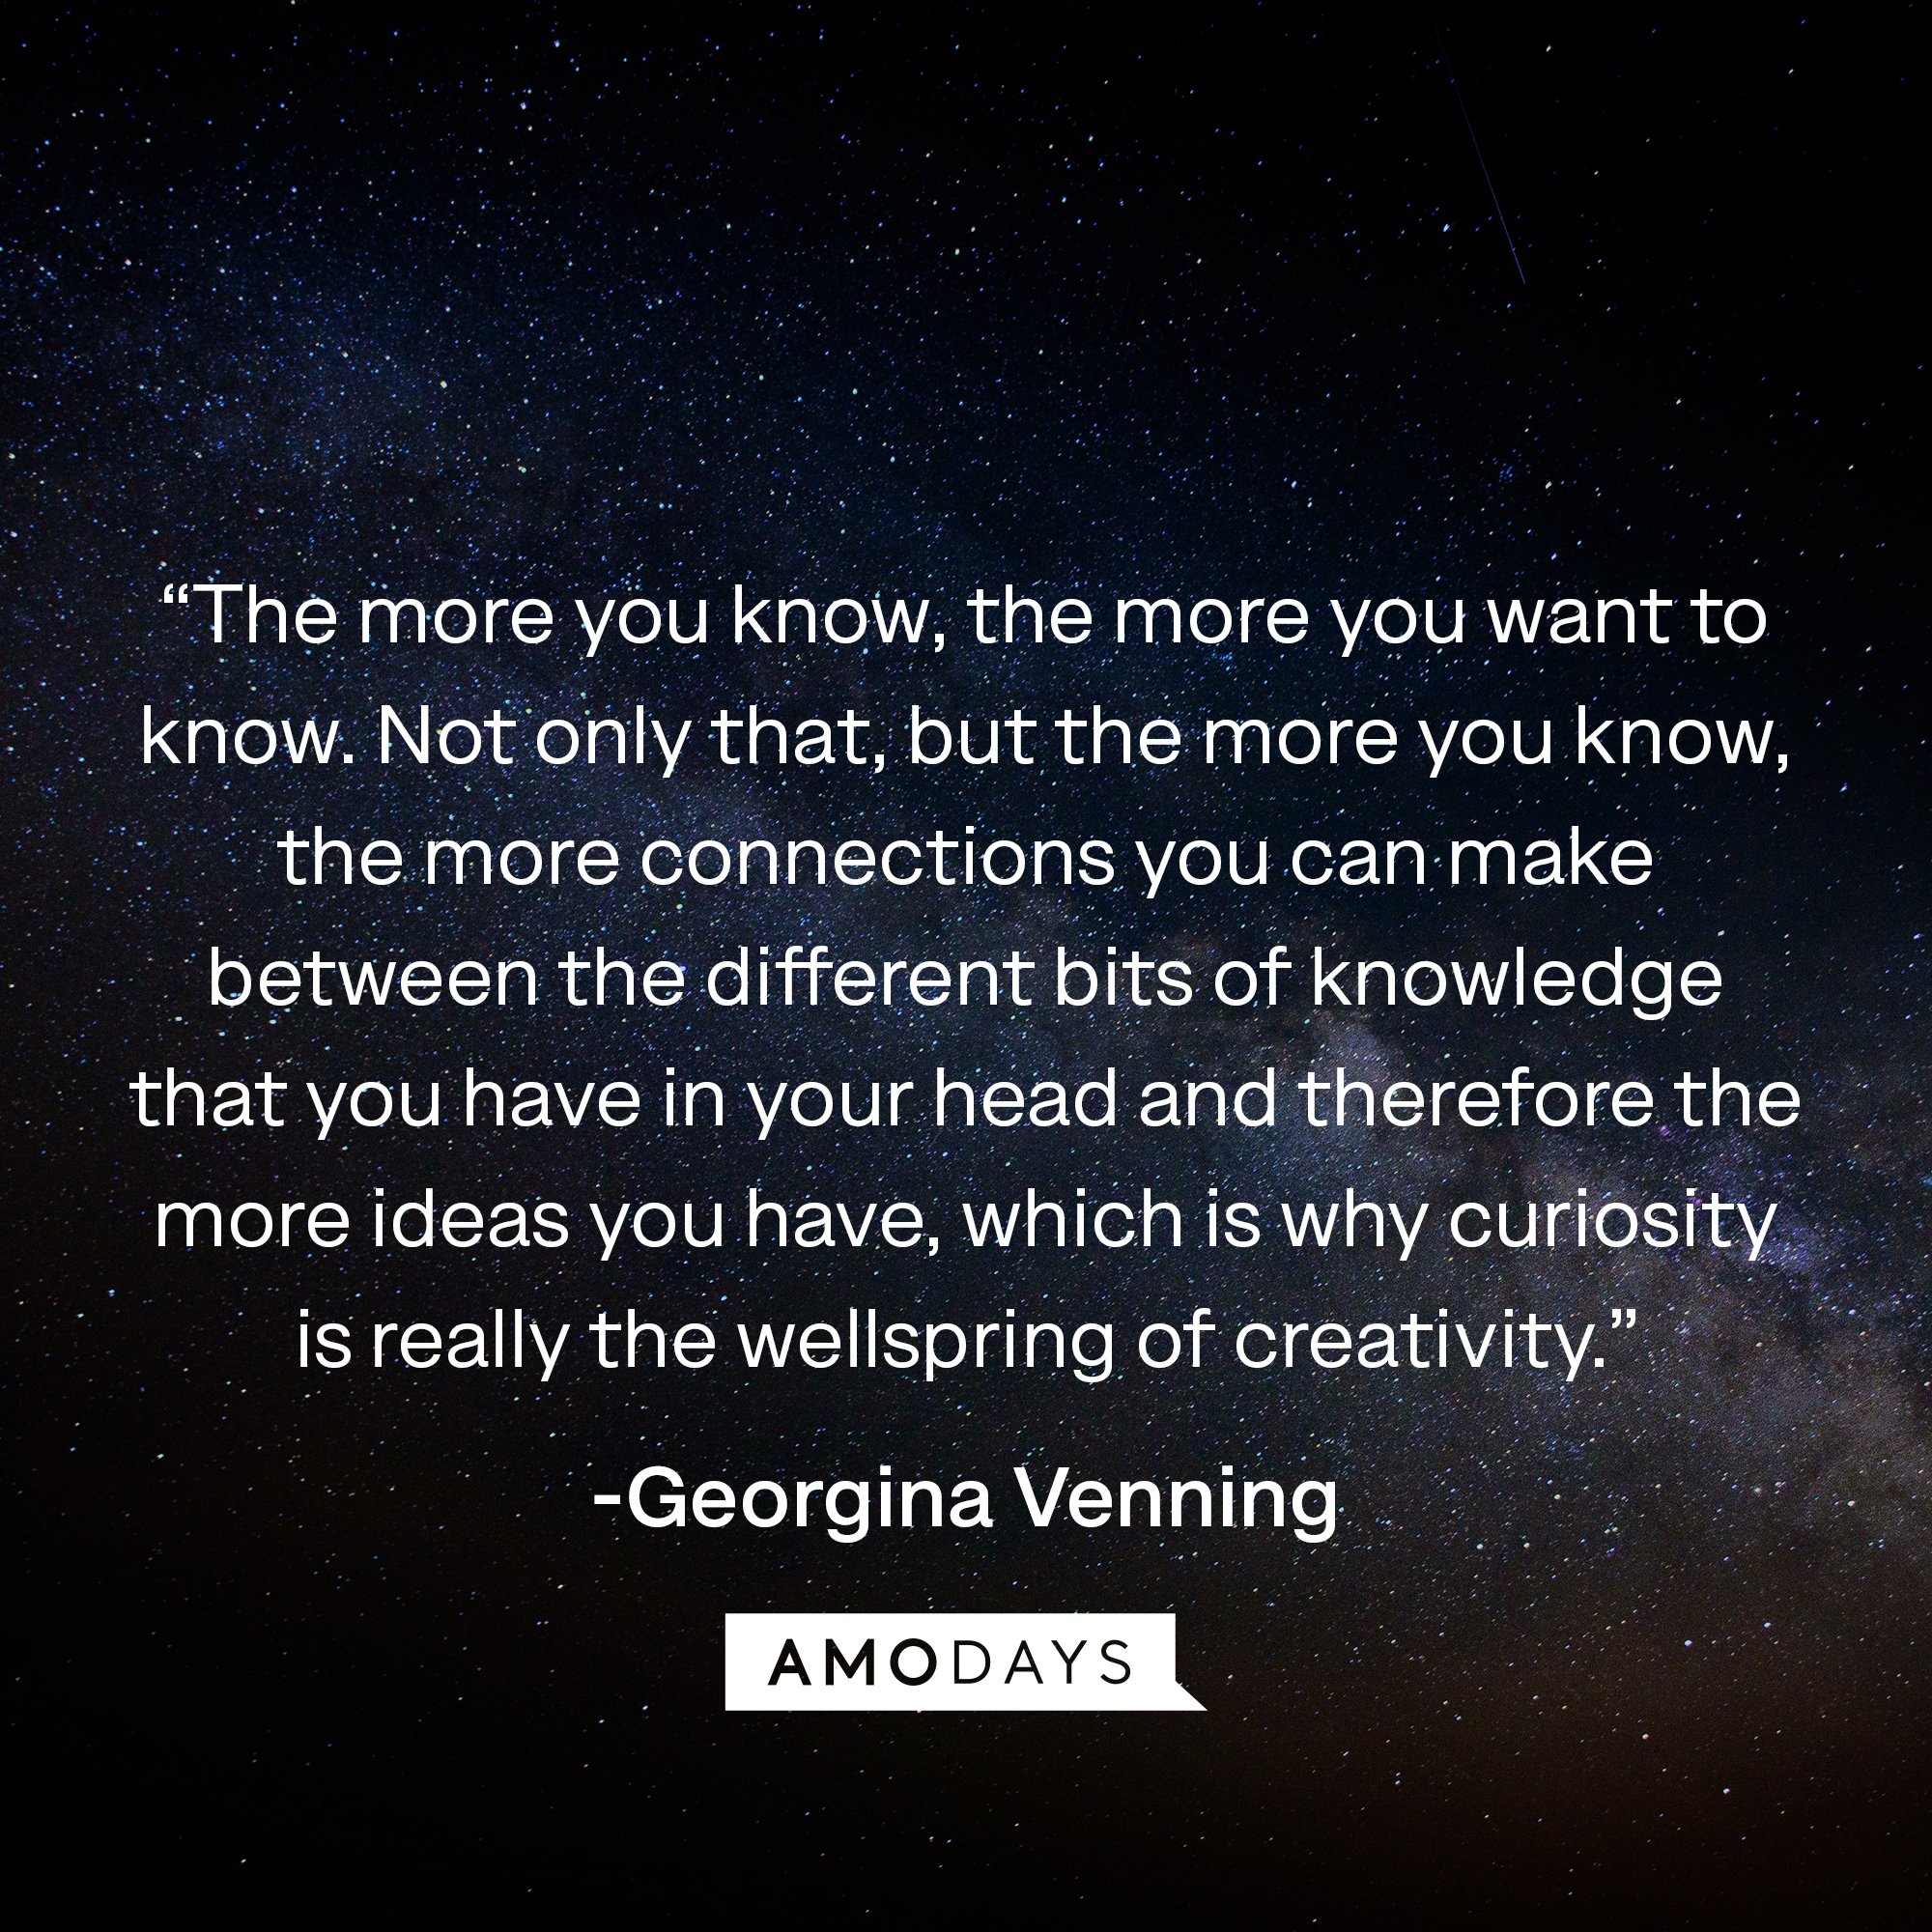  Georgina Venning's quote: “The more you know, the more you want to know. Not only that, but the more you know, the more connections you can make between the different bits of knowledge that you have in your head and therefore the more ideas you have, which is why curiosity is really the wellspring of creativity.” | Image: AmoDays